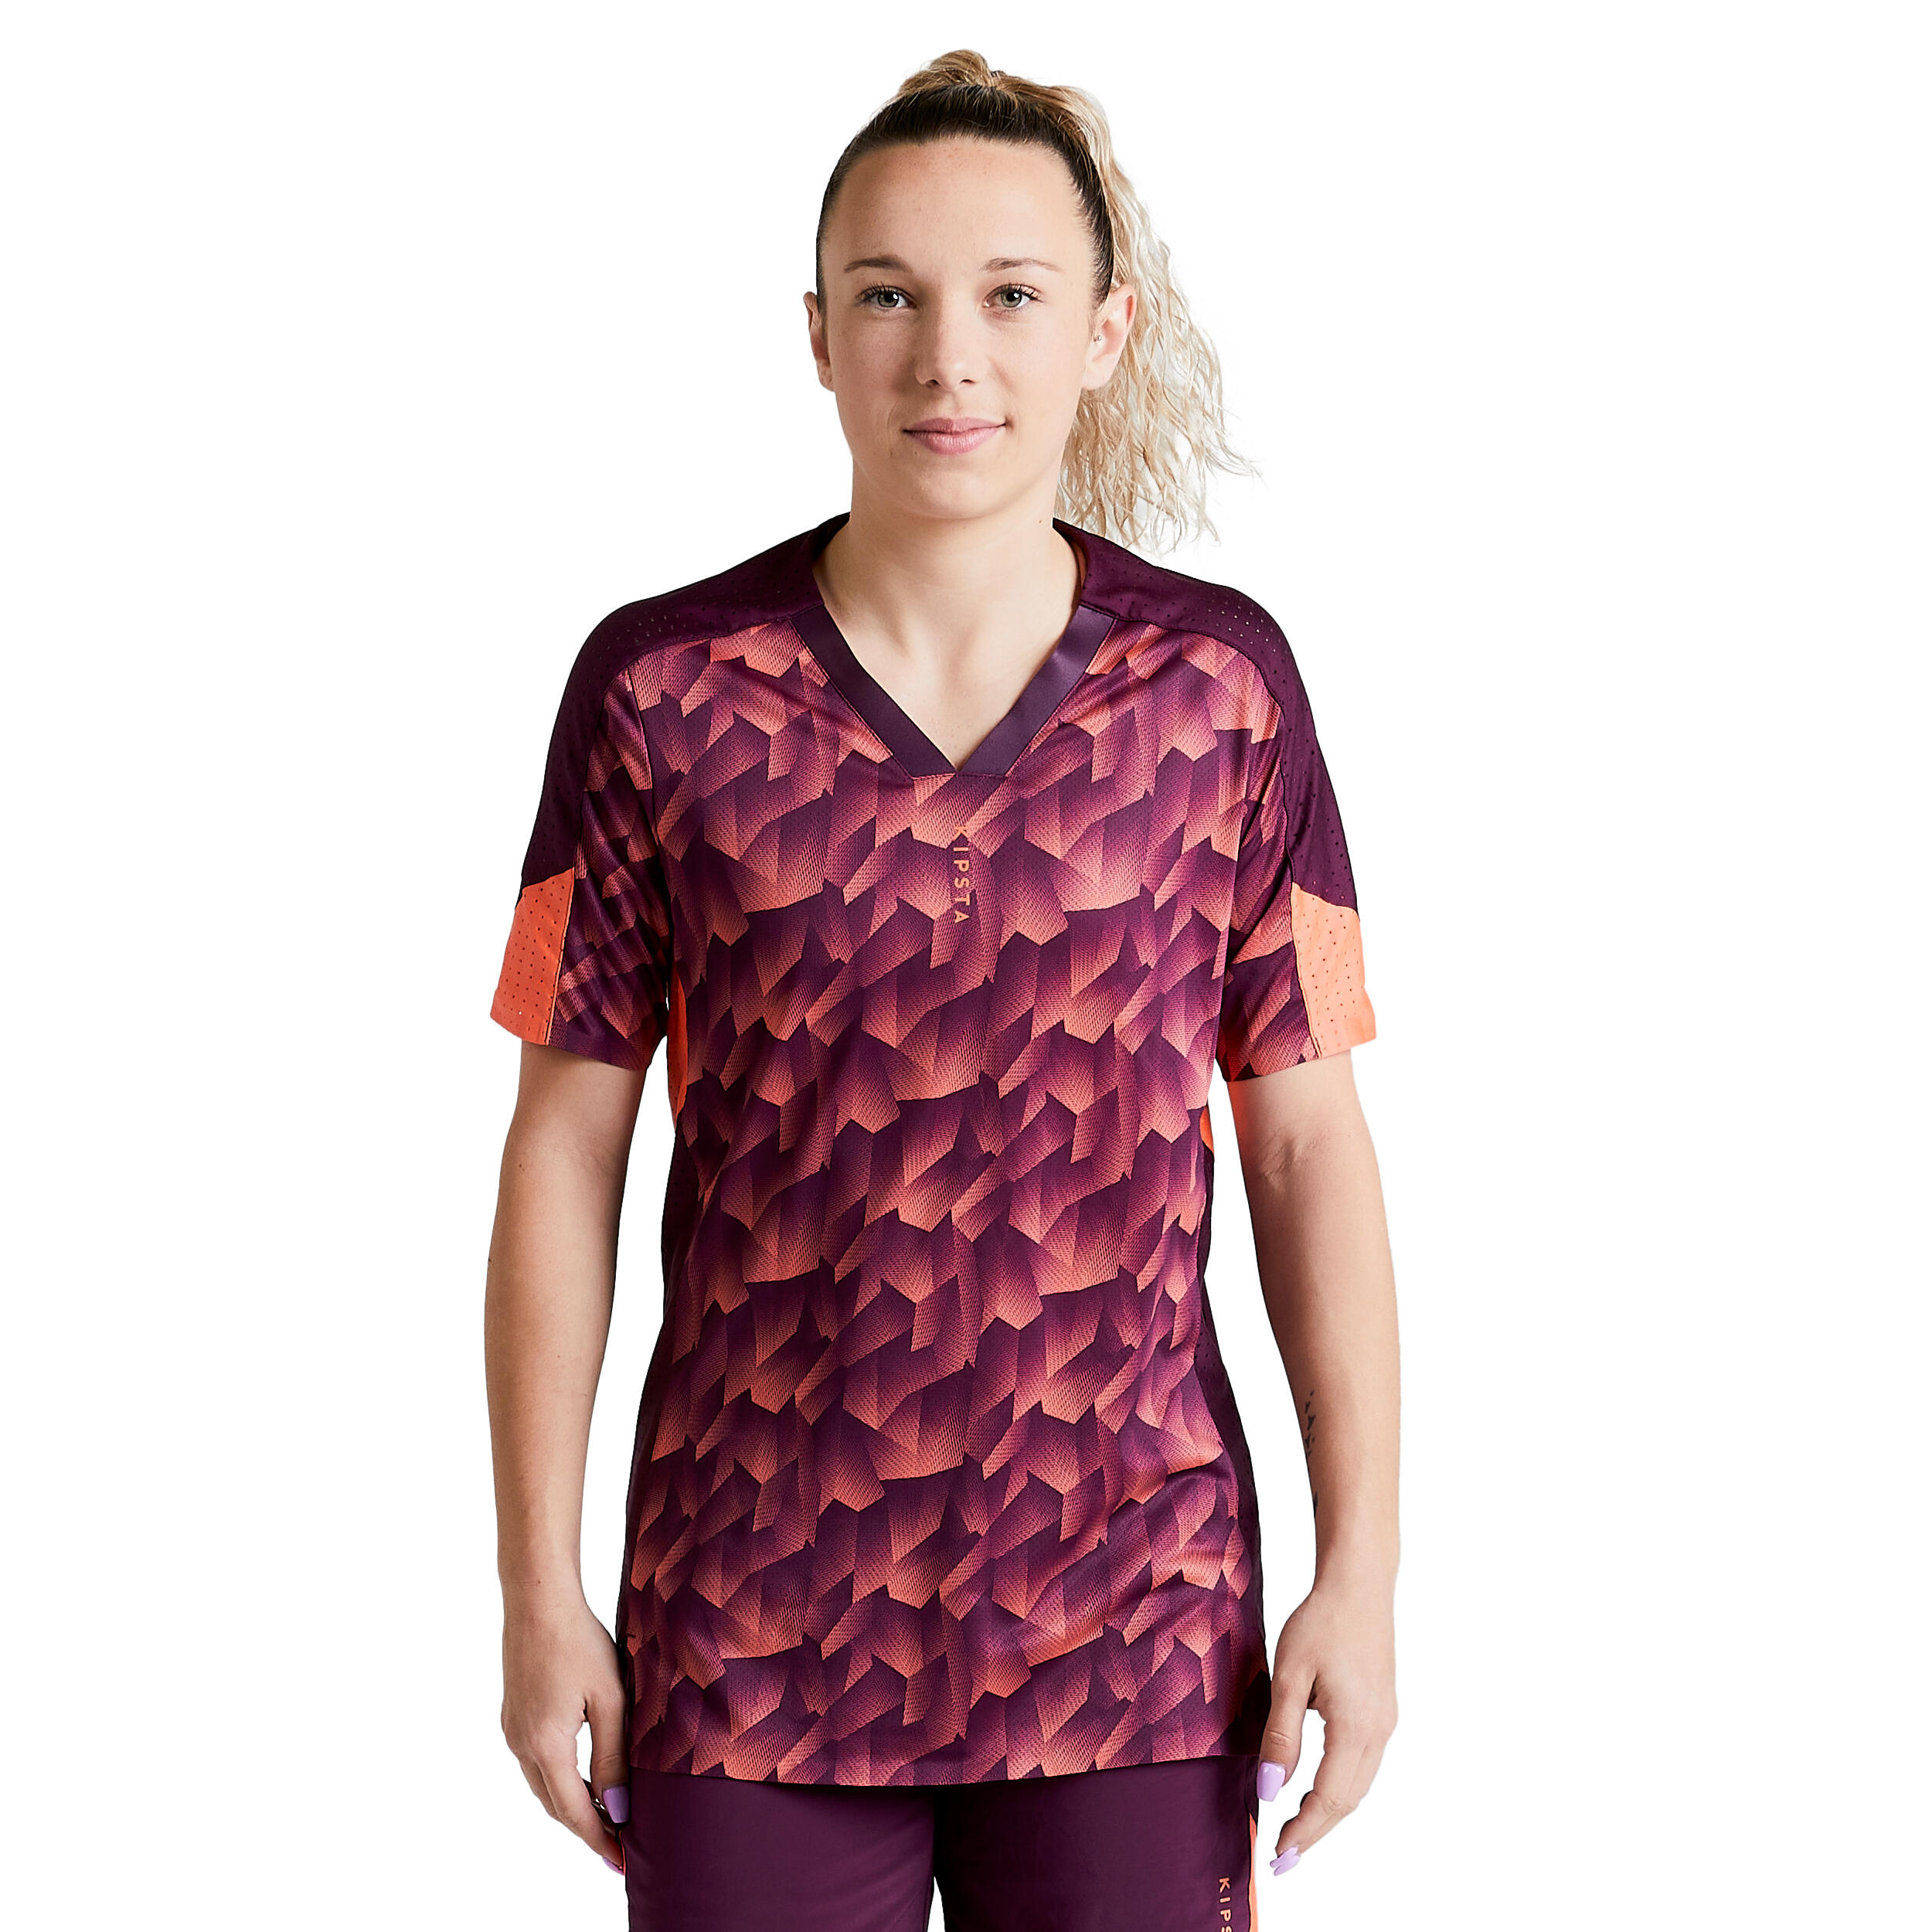 Women's Football Jersey F900 - Coral 4/31